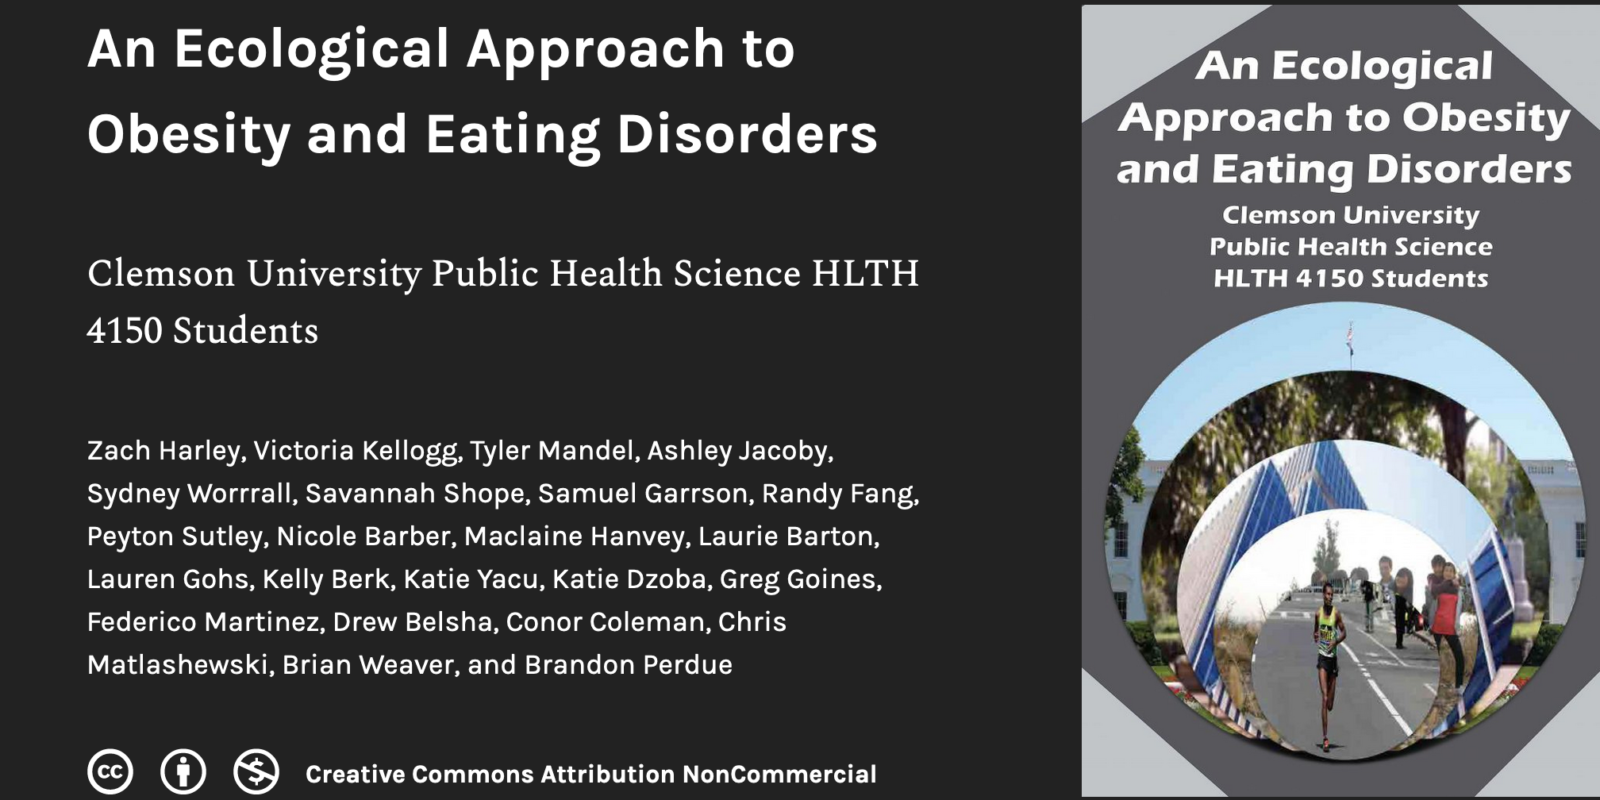 An Ecological Approach to Obesity and Eating Disorders